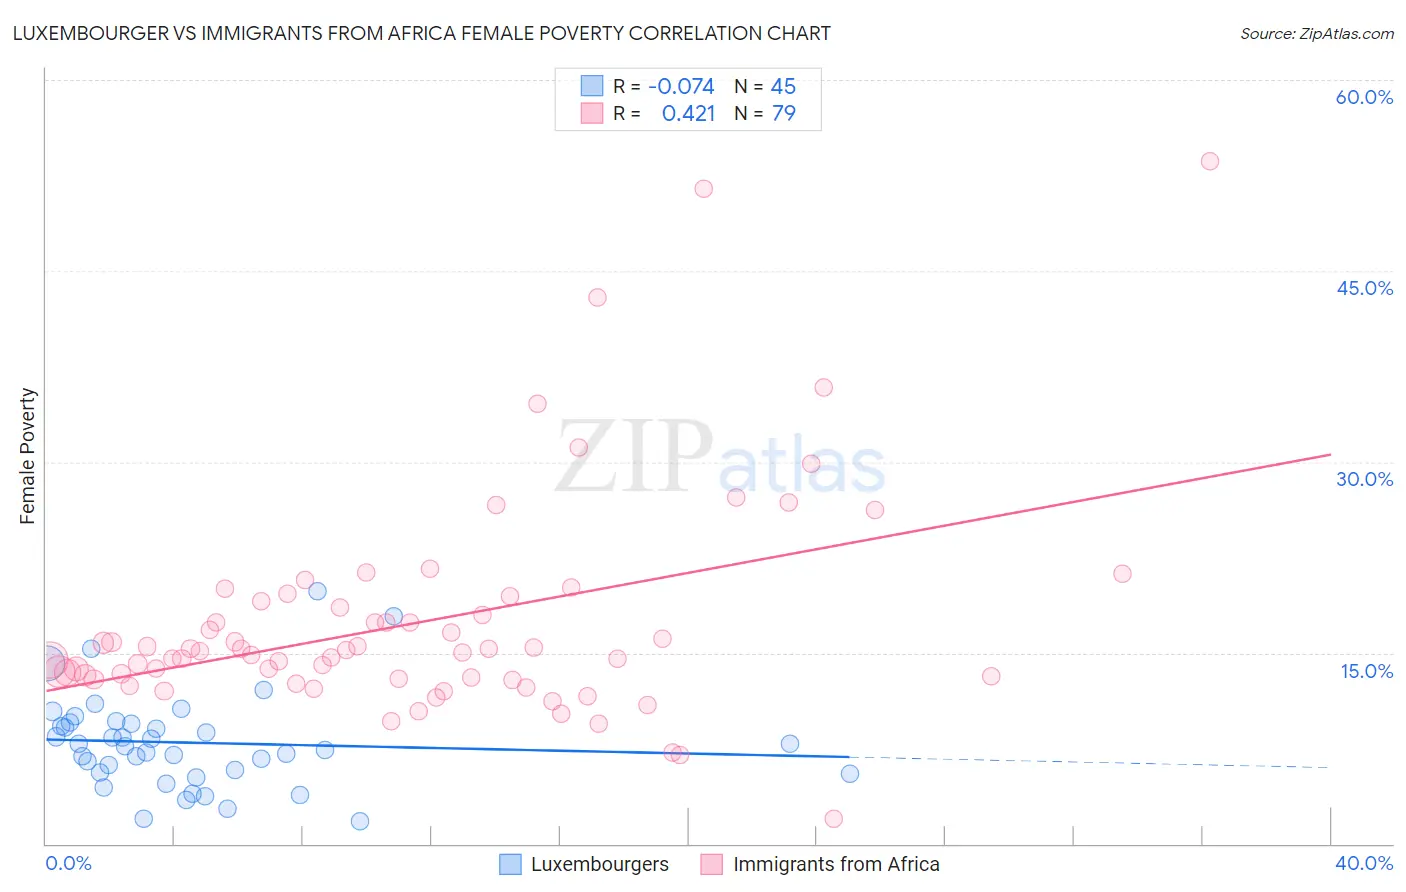 Luxembourger vs Immigrants from Africa Female Poverty